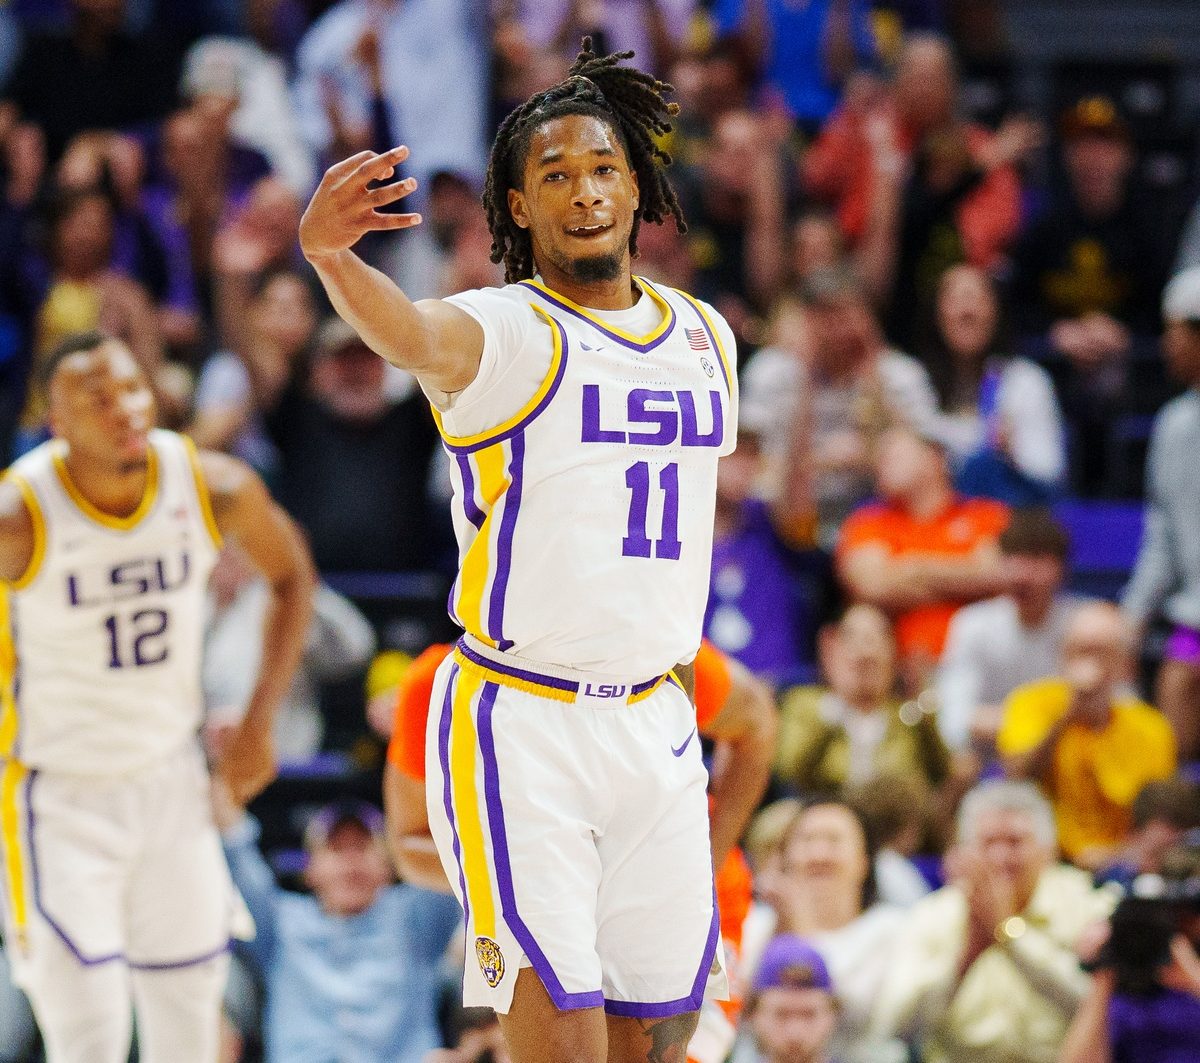 Texas Tech vs. LSU Prediction, Preview, and Odds - 1-28-2023